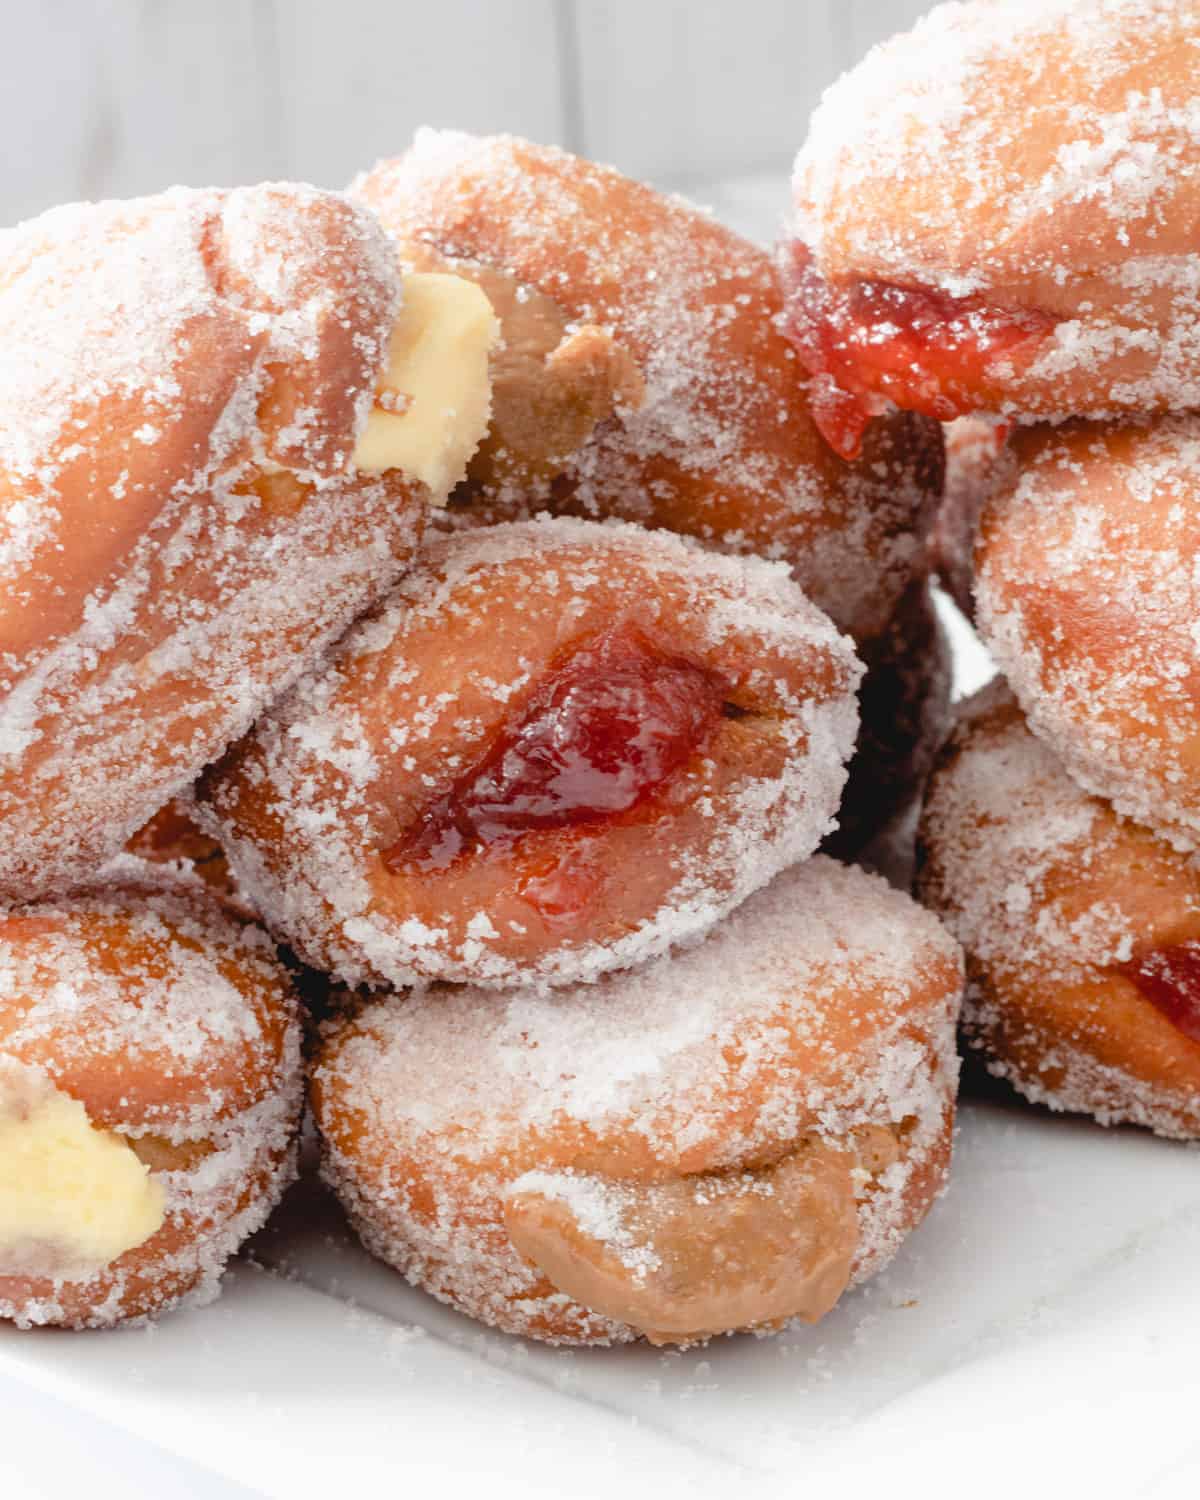 Paczki donuts piled on a plate. There are different fillings in them, including custard, strawberry, and dulce de leche.